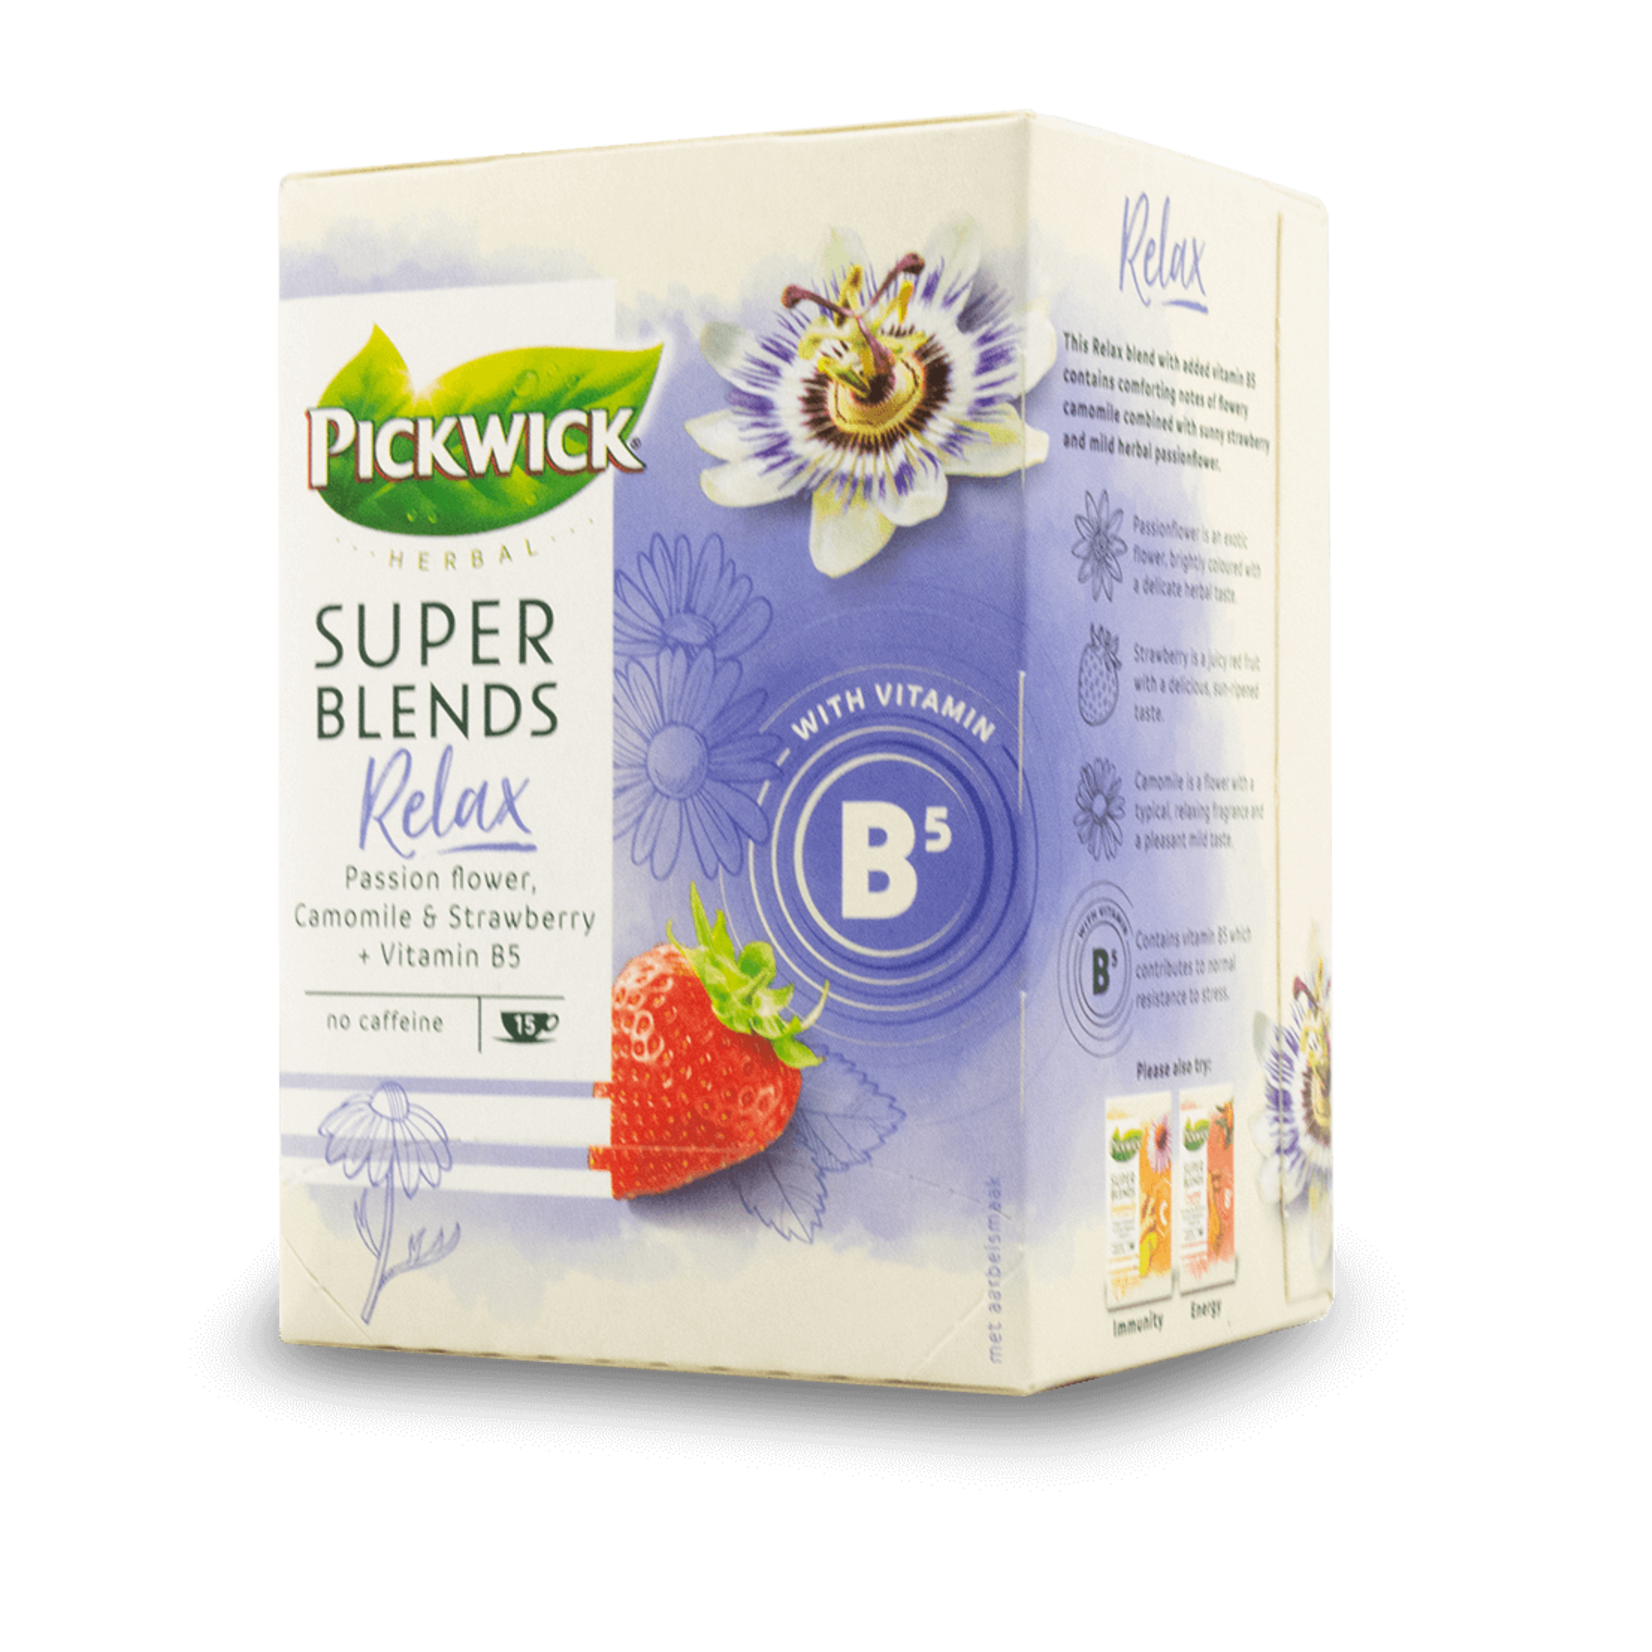 Pickwick Pickwick Super Blends - Relax 15x1.5g